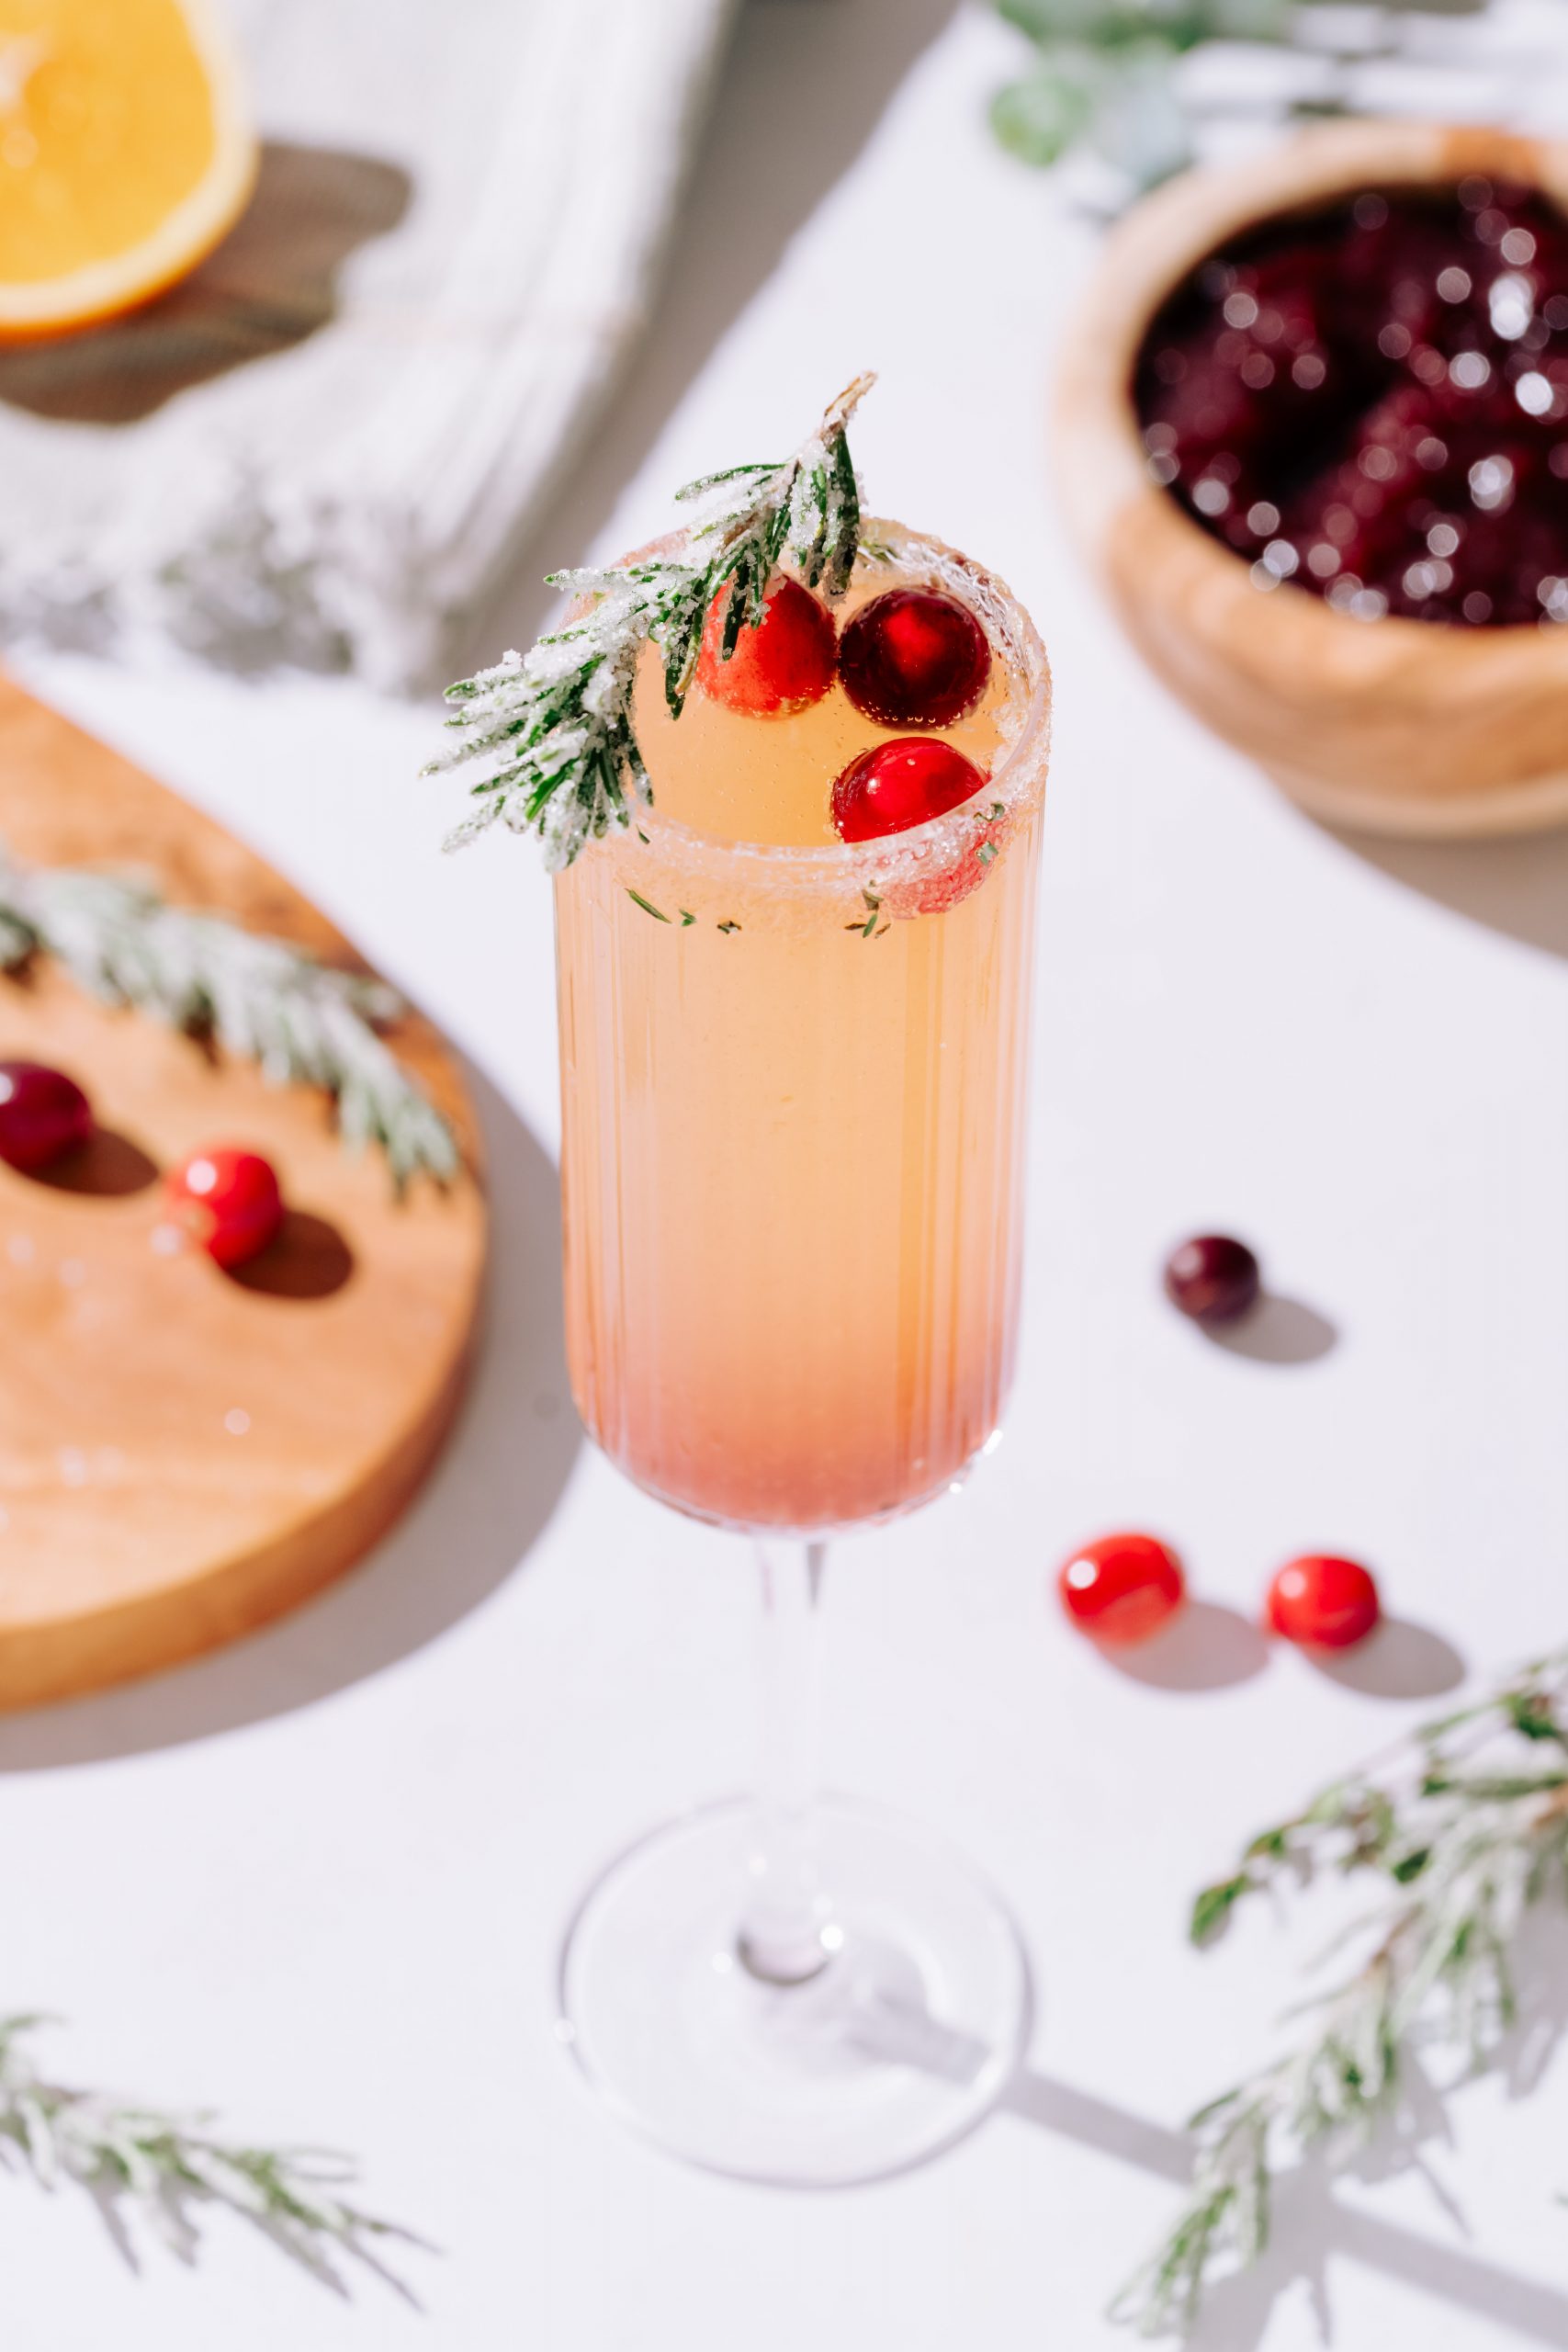 A cranberry mimosa garnished with cranberries and sugared rosemary